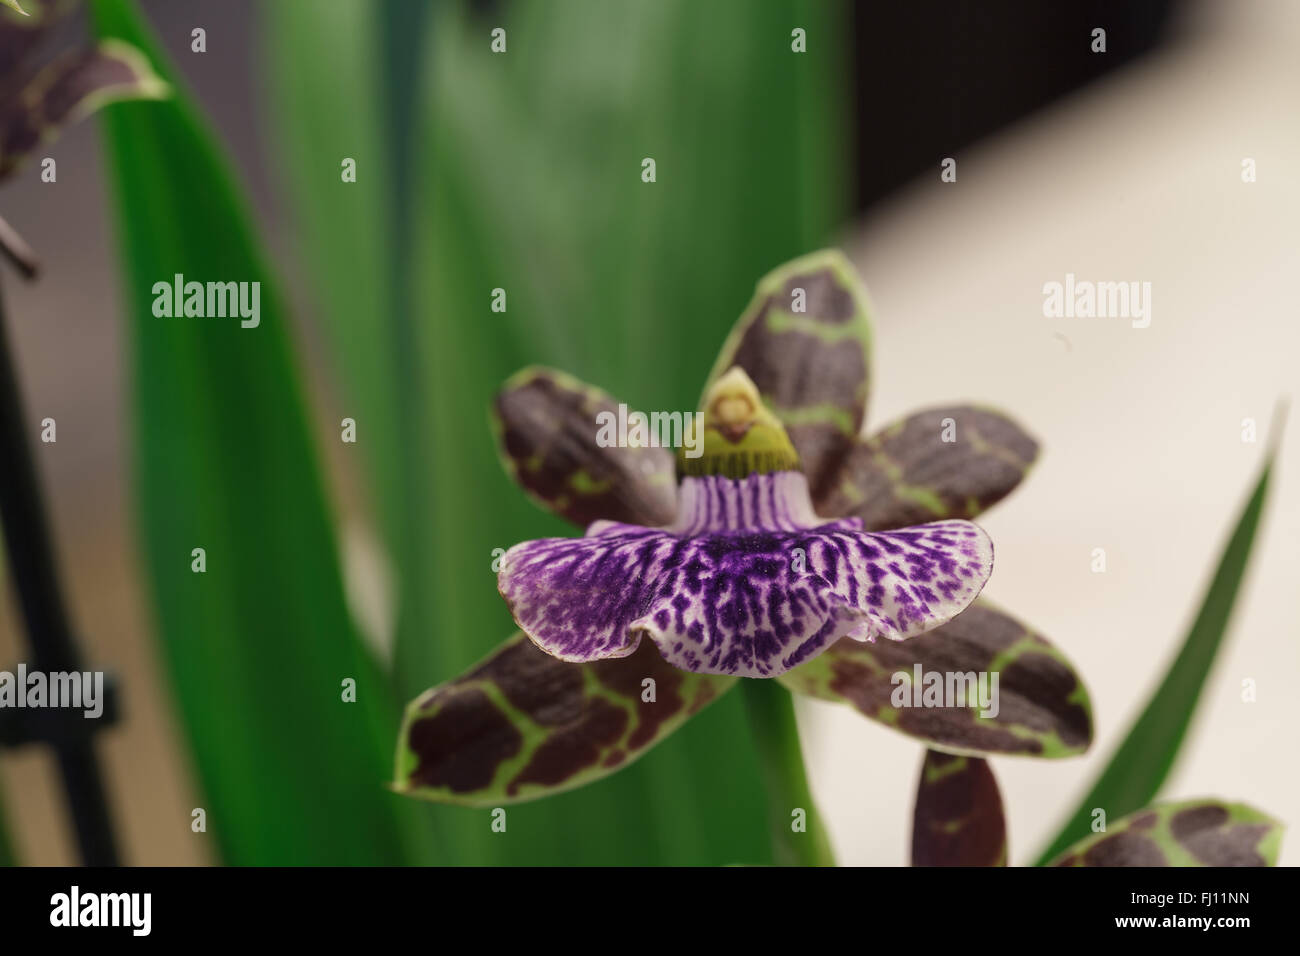 Purple and green orchid, Zygopetalum orchid species, on a leafy green background Stock Photo